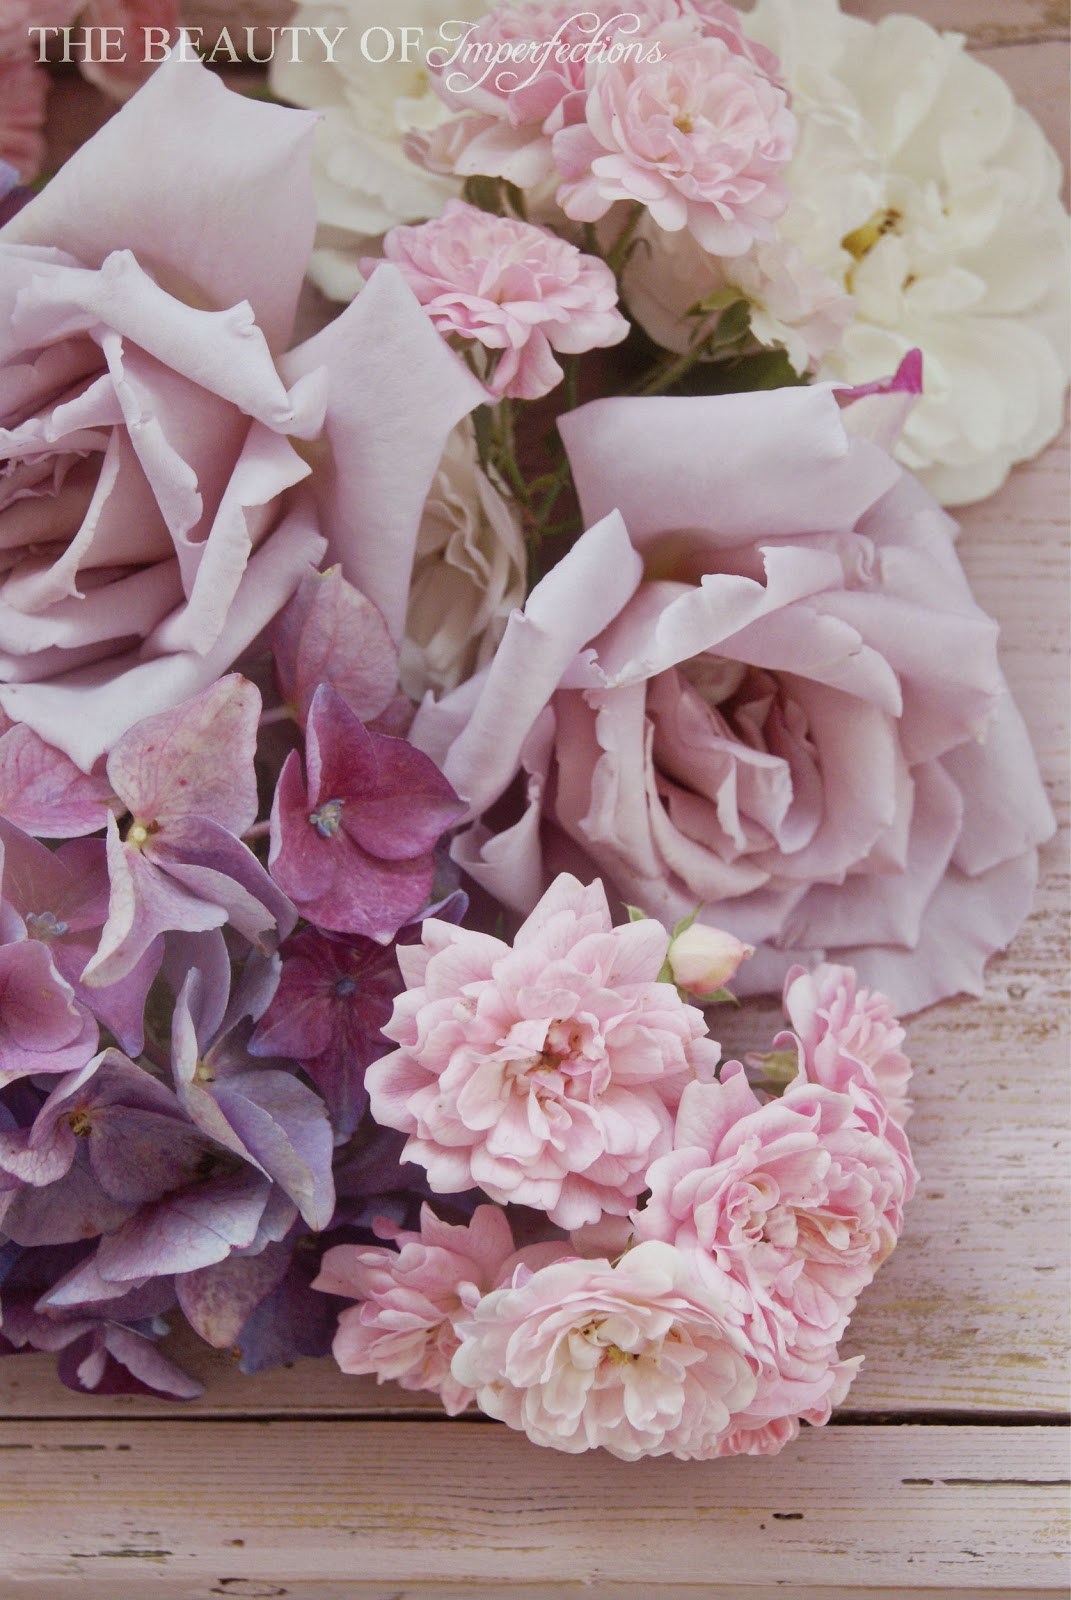 THE BEAUTY OF IMPERFECTIONS: FLORAL PERFECTION